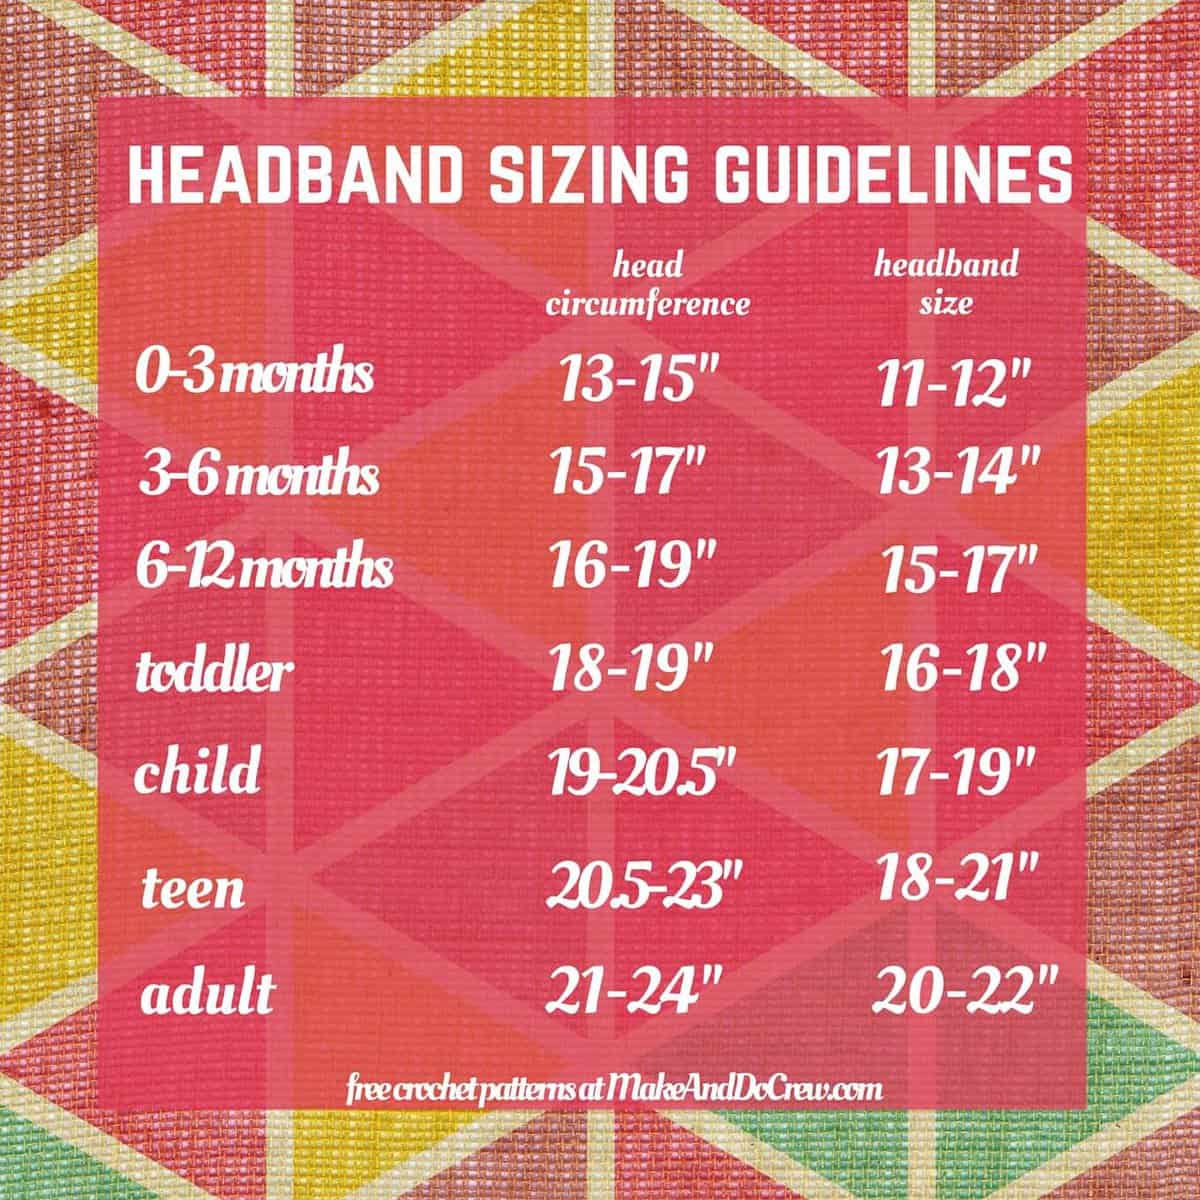 Crochet, knit and no-sew headband size guidelines. This chart includes sizes for newborns, 3-6 months (baby), 6-12 months, toddler/preschooler, child, and teen/adult. Click for free crochet headband pattern. | MakeAndDoCrew.com